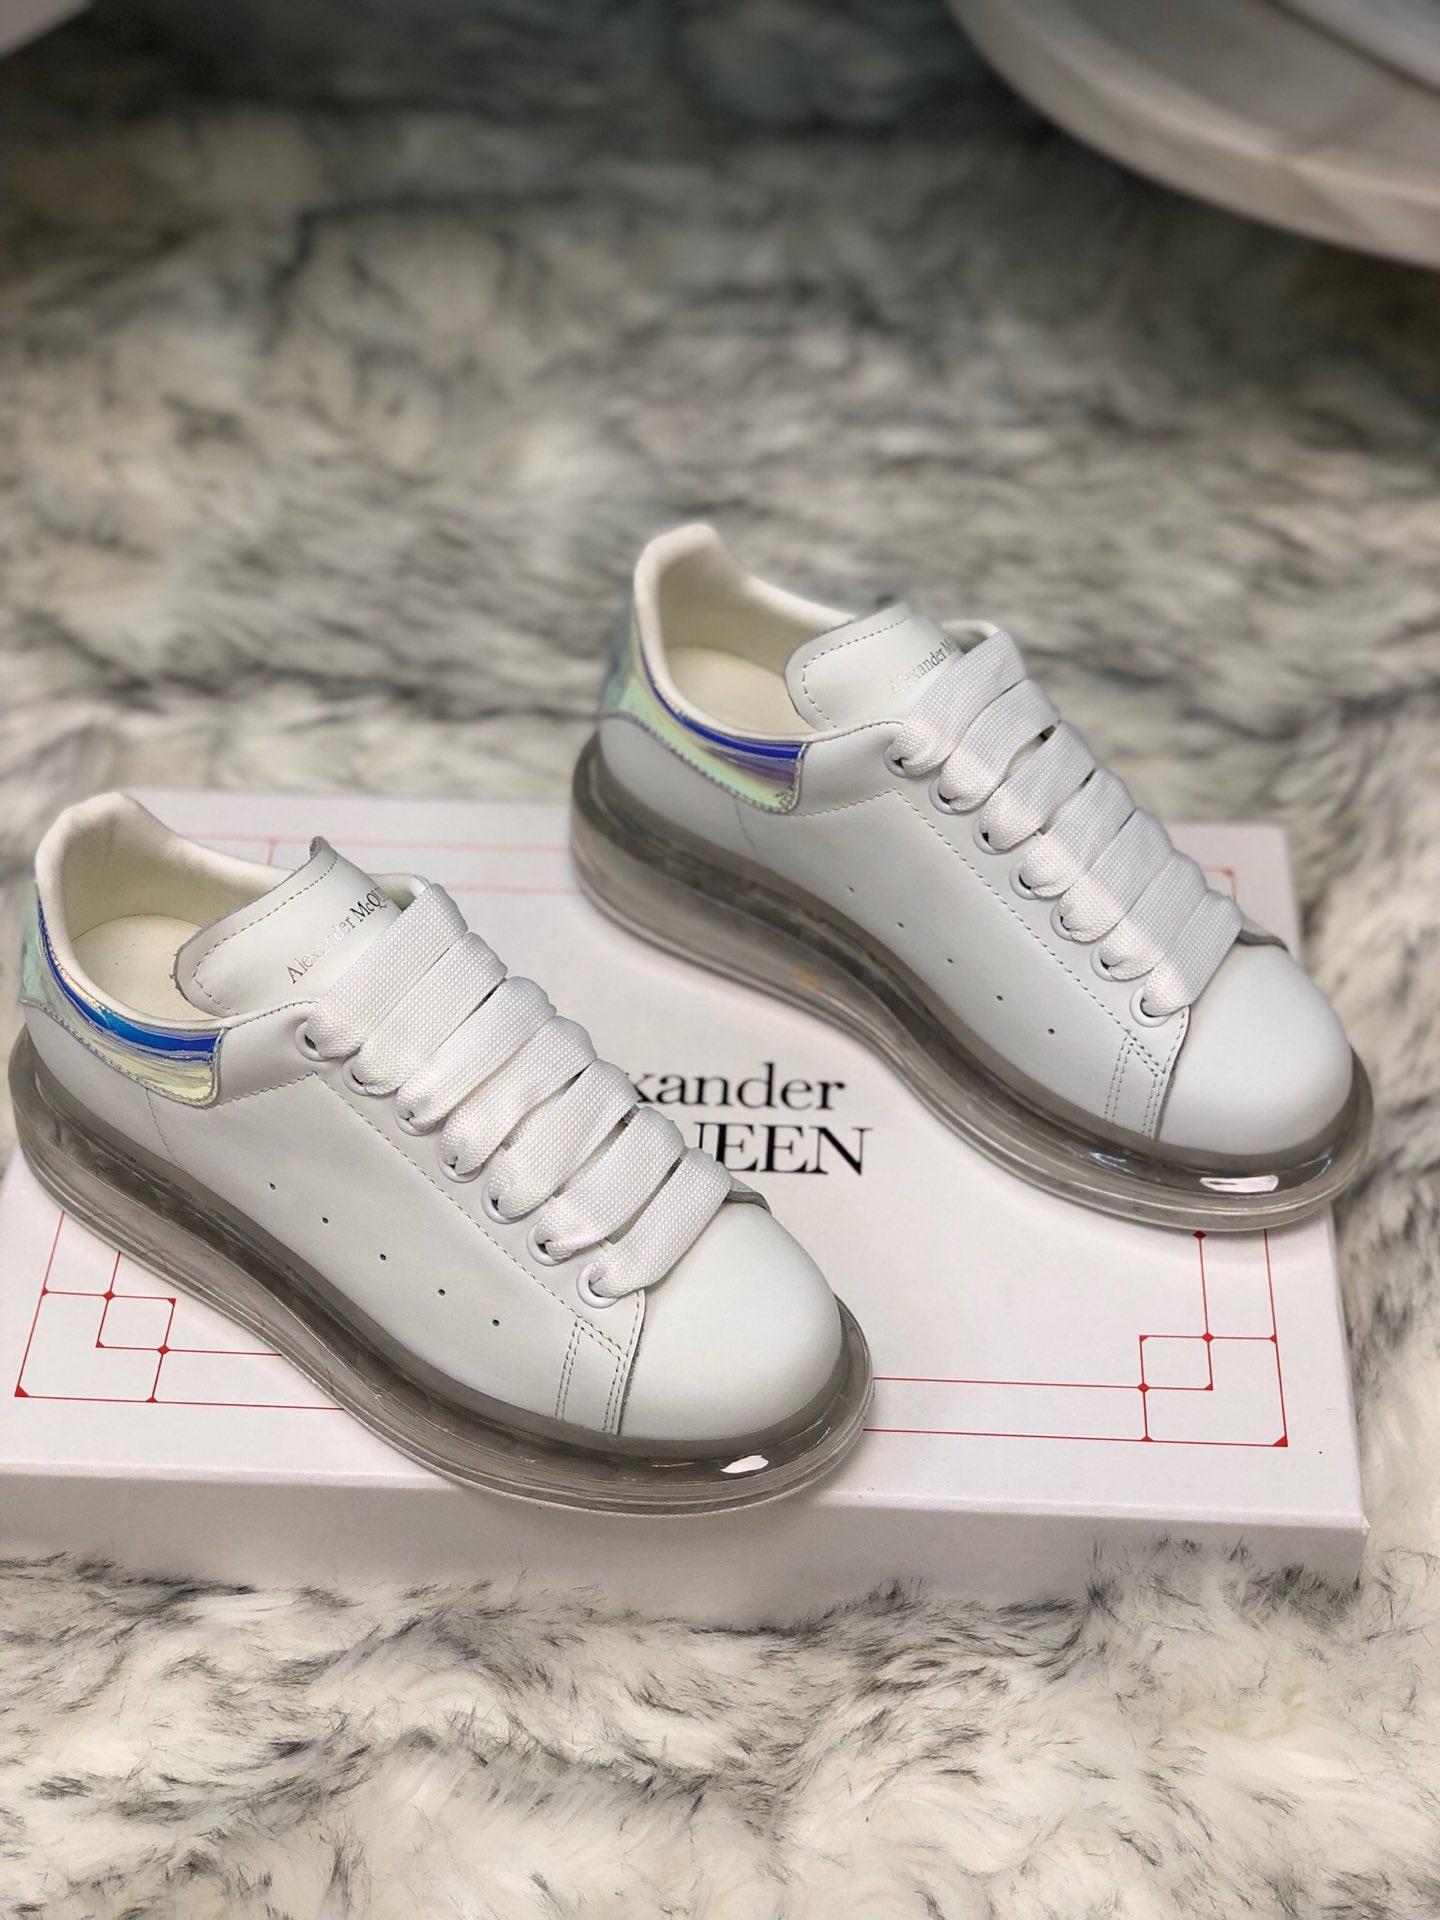 Alexander McQueen Fahion Sneaker White and Iridescent heel with transparent sole MS100030